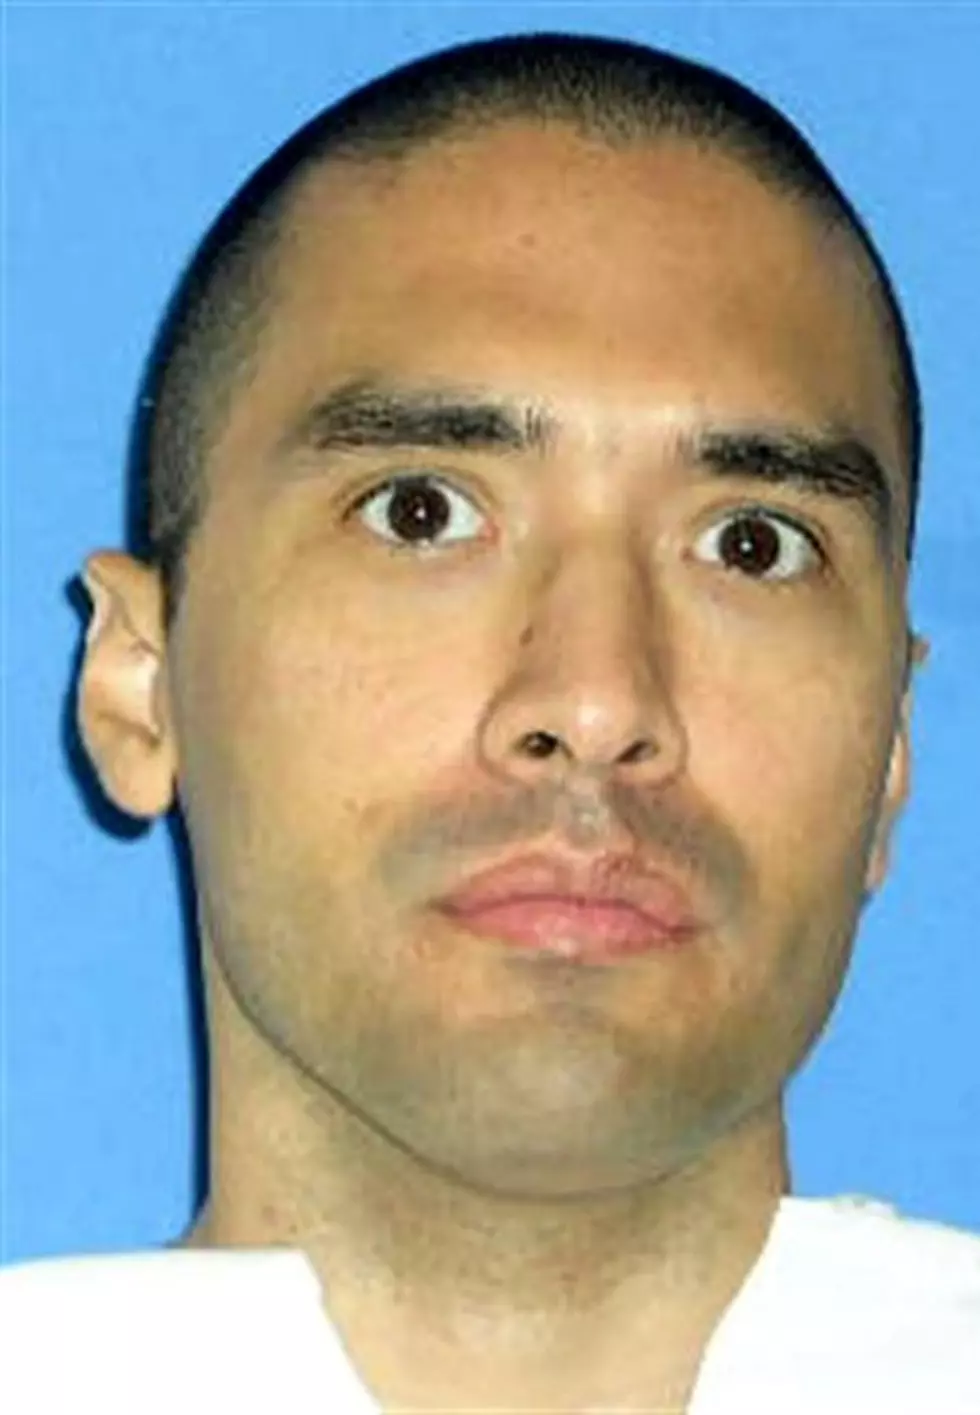 Texas Executes Convicted Cut-Rate Killer-For-Hire